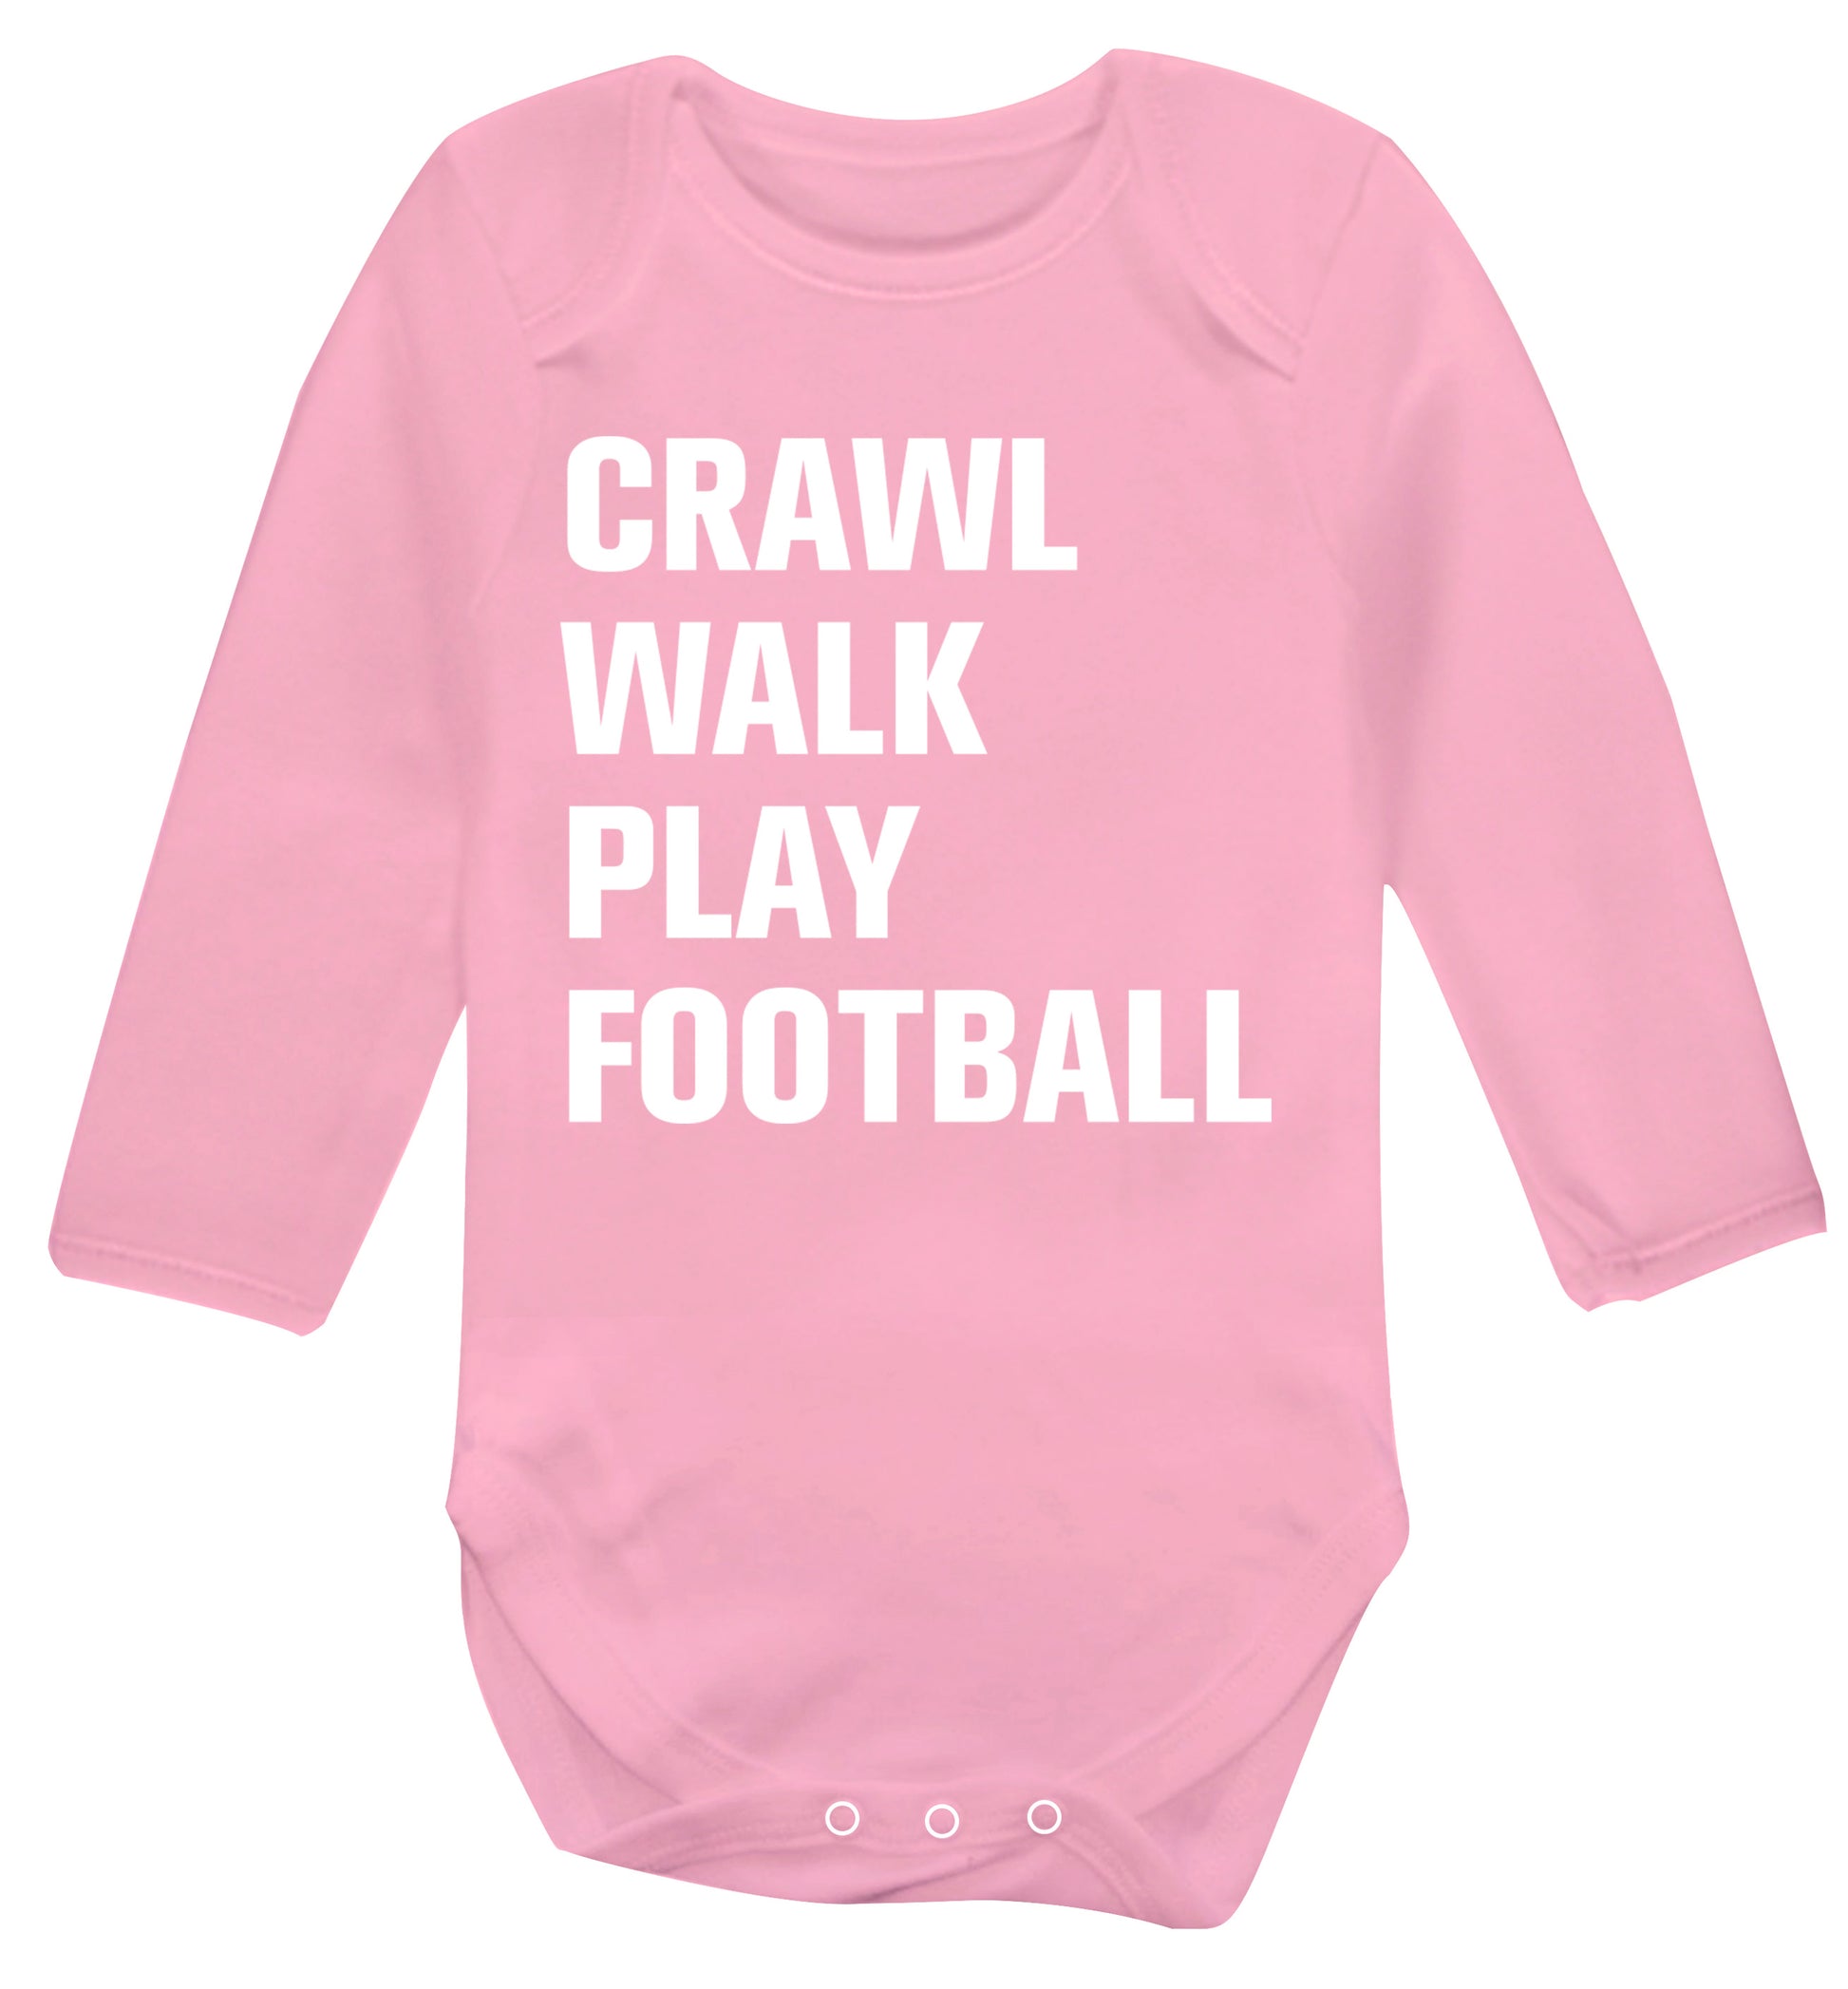 Crawl, walk, play football Baby Vest long sleeved pale pink 6-12 months